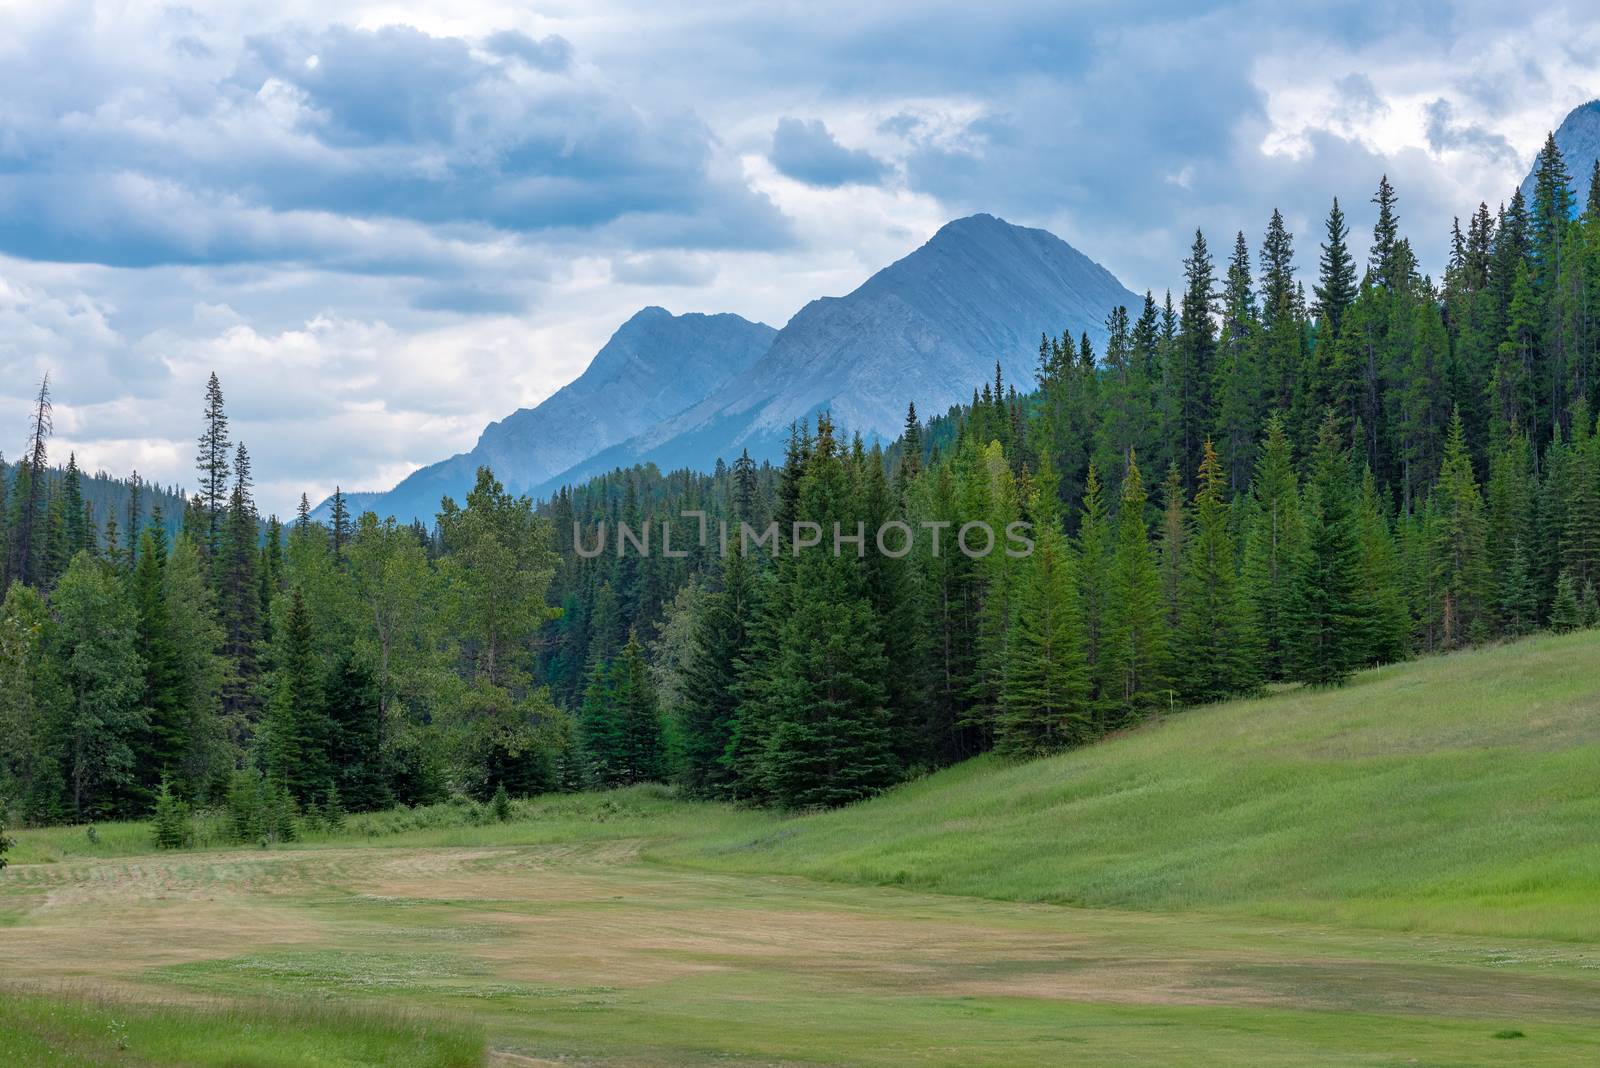 Photo of a clearing in the woods surrounded by trees with the Canadian Rockies in the background.